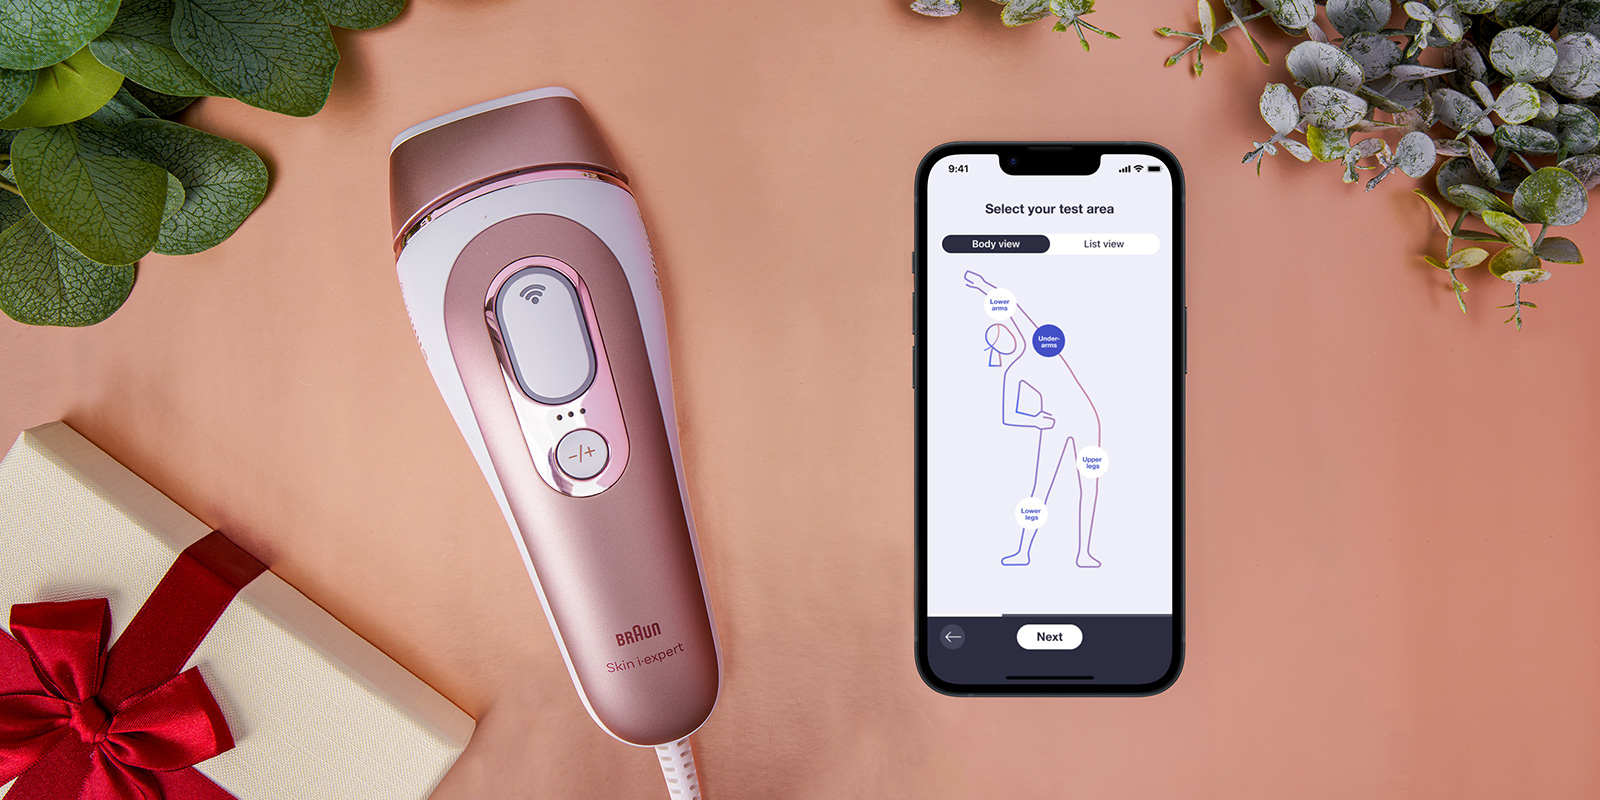 Hair Removal] Hello! Can I use IPL twice a week? How to turn off braun silk  expert pro lol? I don't see a turn off botton. Also, do I need to wear